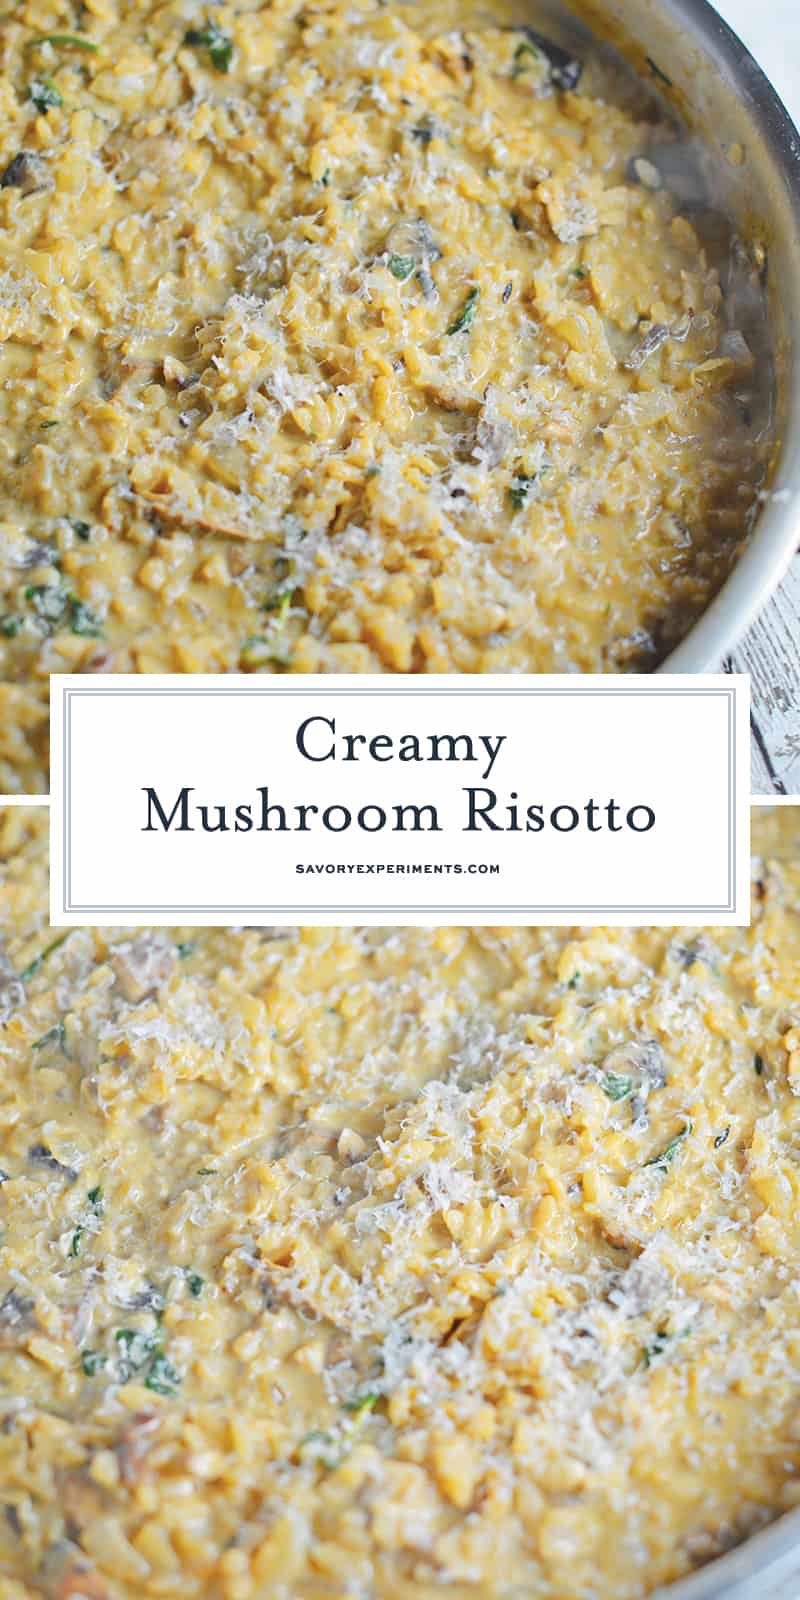 This Creamy Mushroom Risotto Recipe shows you how to make risotto in a simple, delectable way! Mushroom risotto is a creamy and lavish dish loaded with flavor! #risottorecipes #mushroomrisotto #whatisrisotto www.savoryexperiments.com